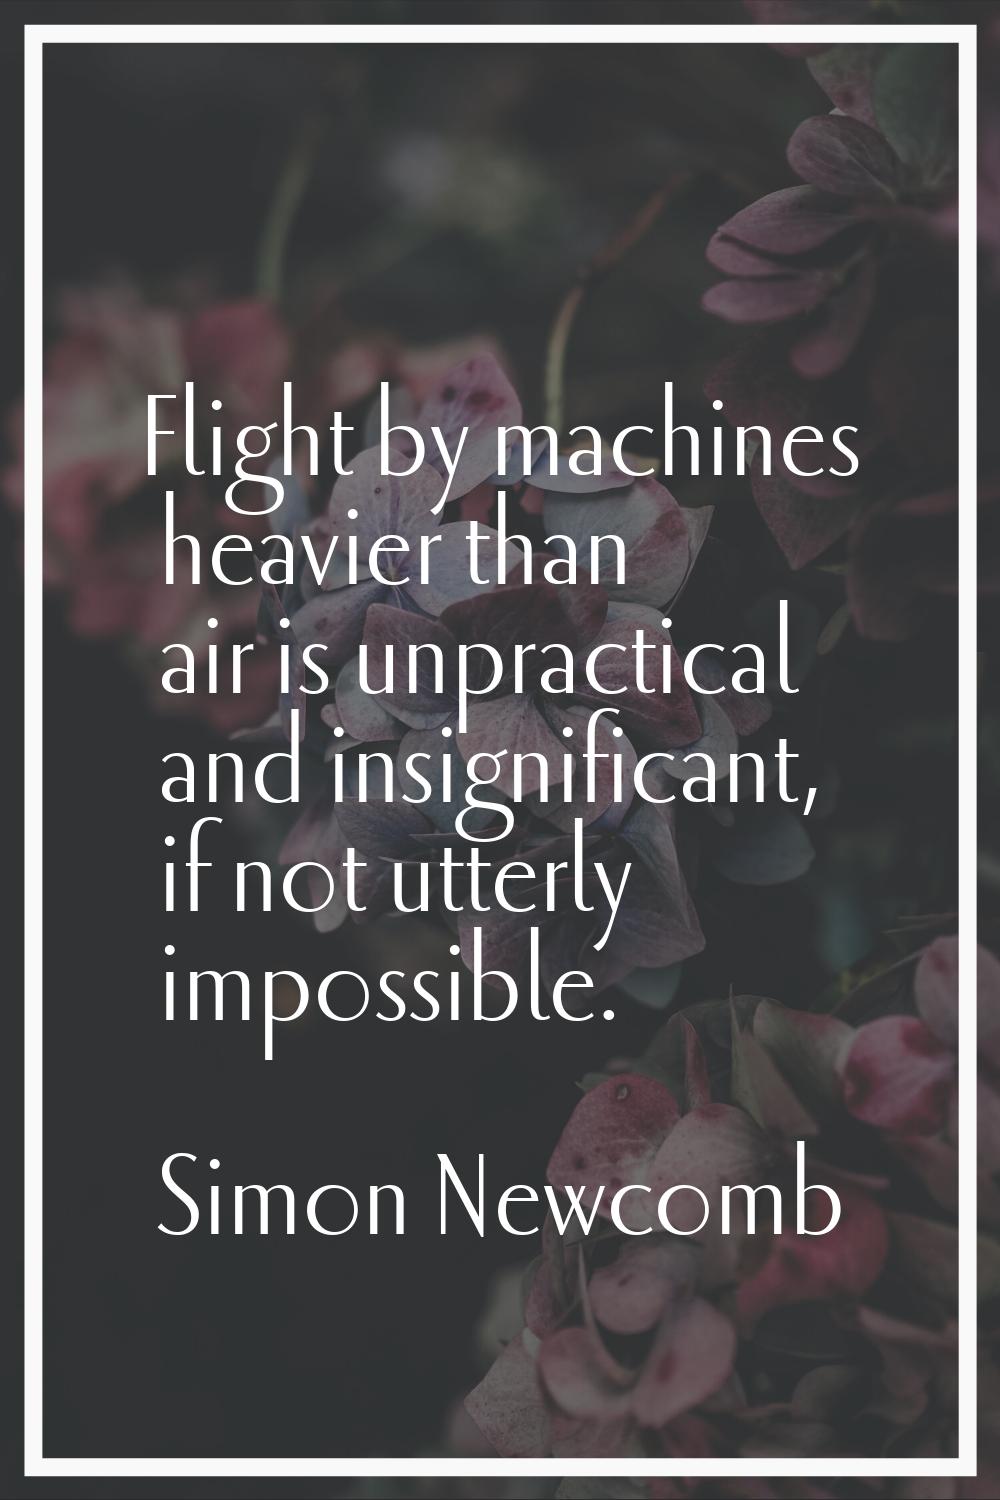 Flight by machines heavier than air is unpractical and insignificant, if not utterly impossible.